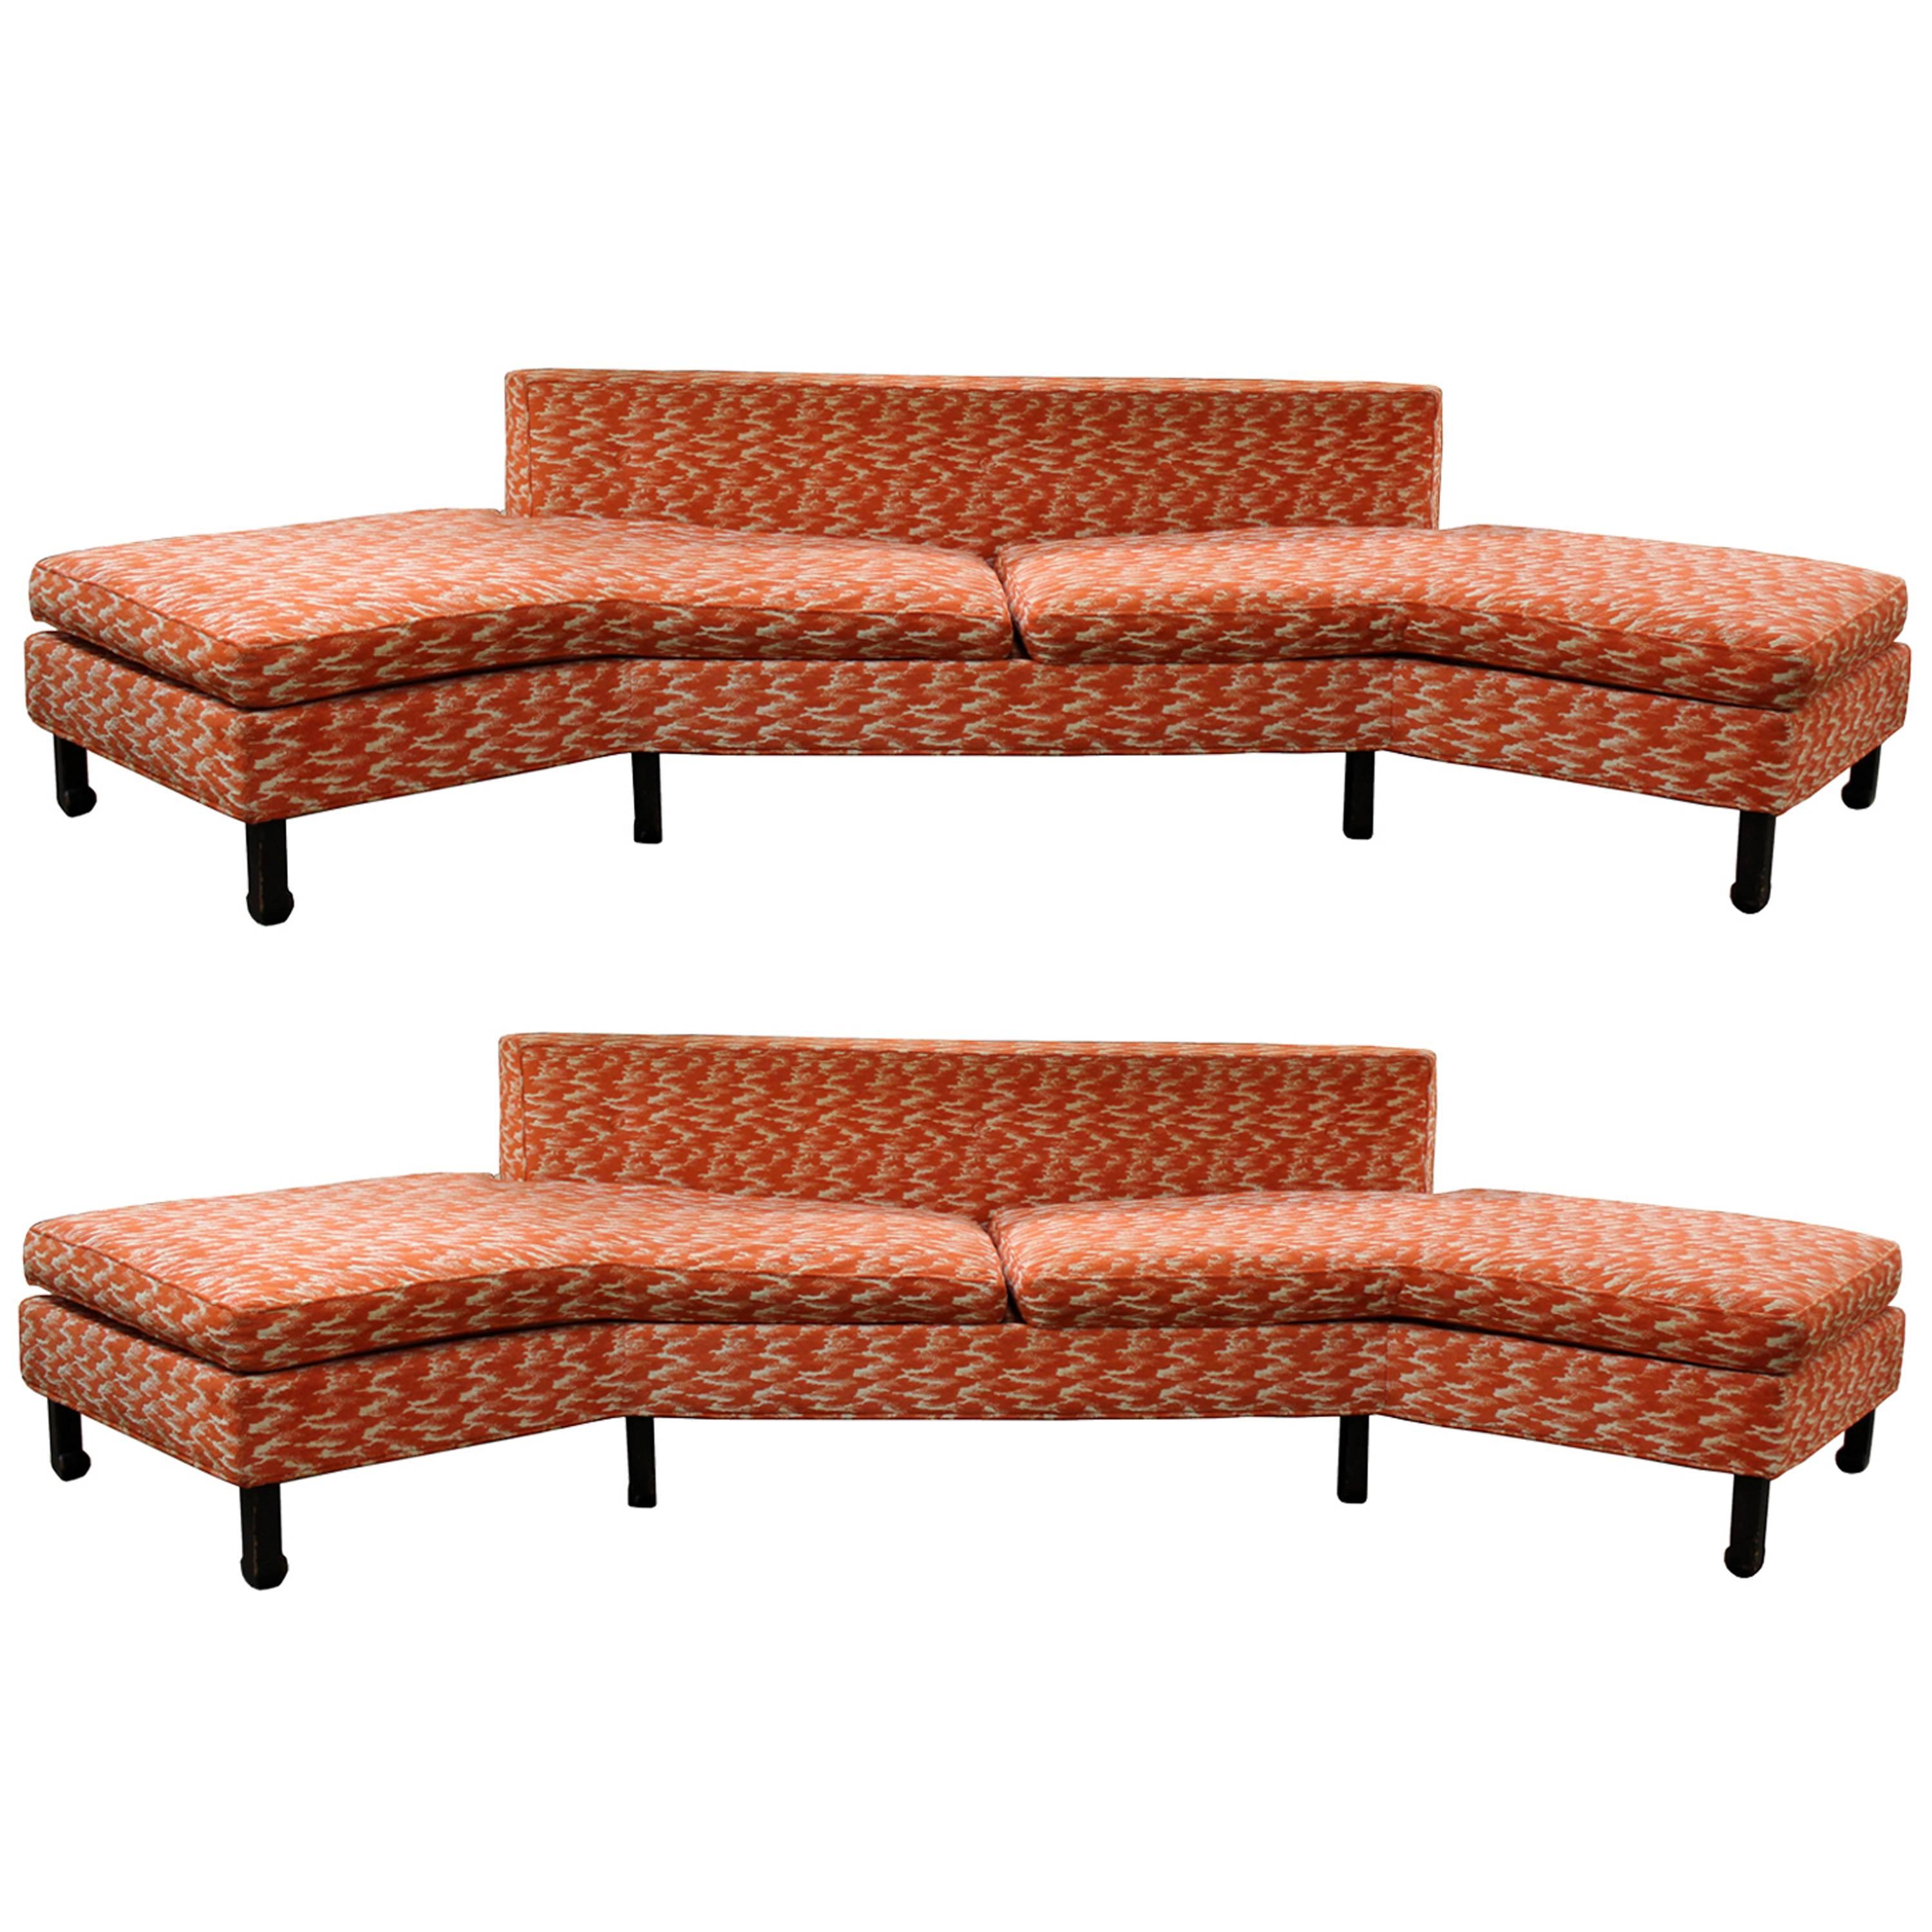 Mid-Century Modern Pair of Rare Curved Sofas Sectional Dunbar Baker Style Asian